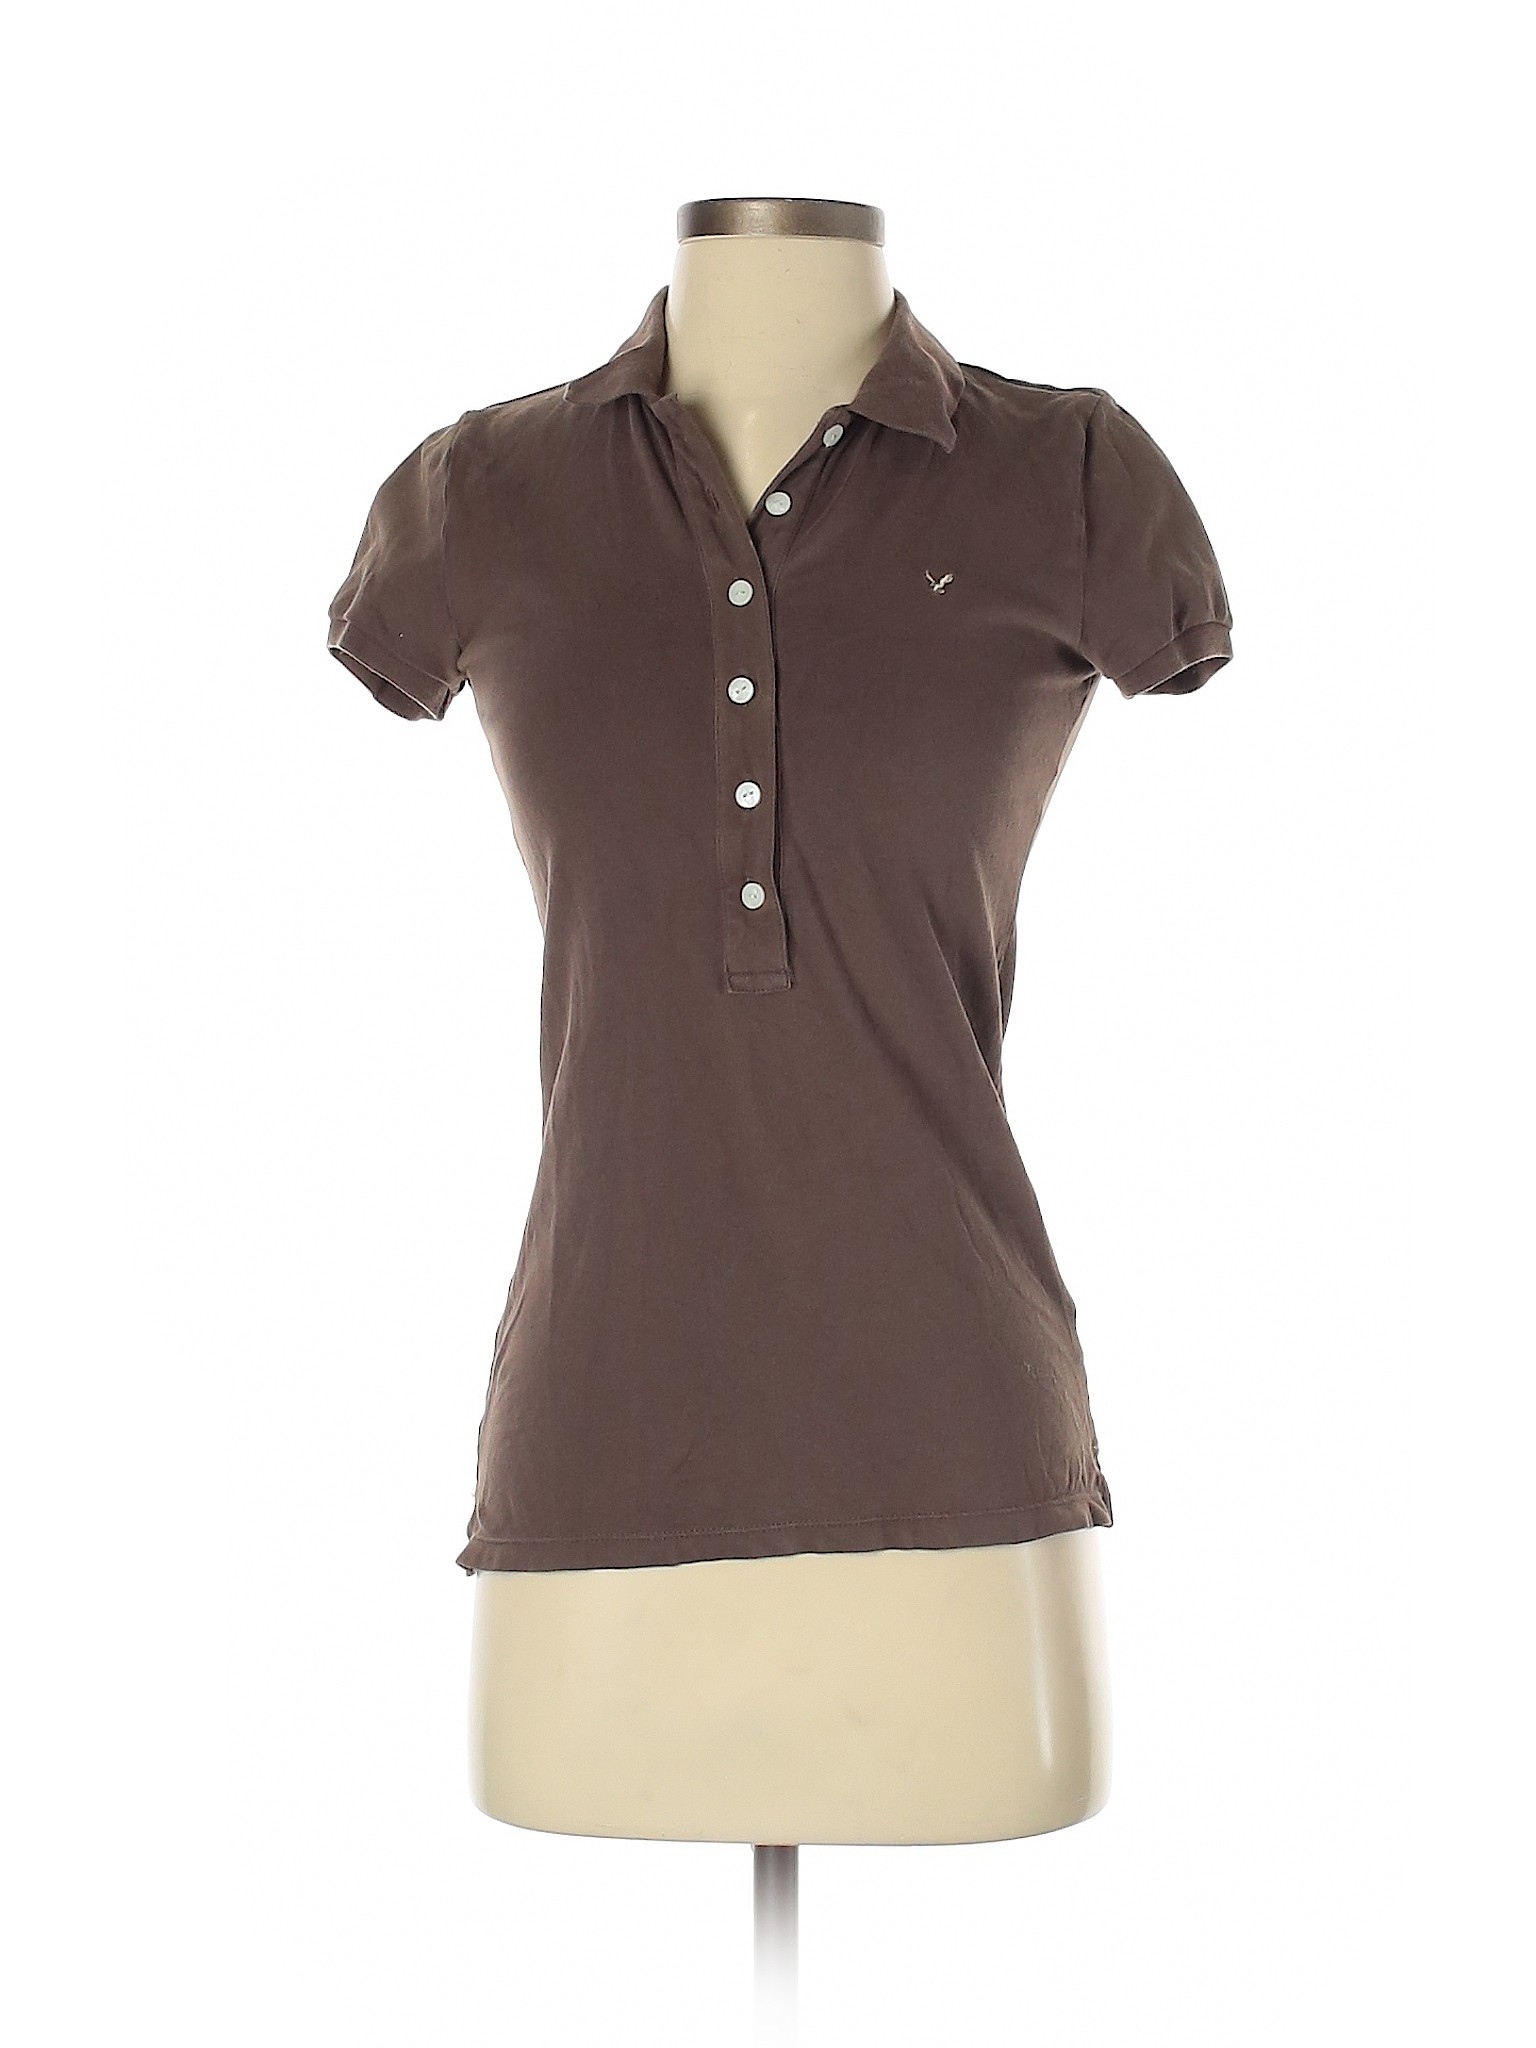 American Eagle Outfitters Women Brown Short Sleeve Polo S | eBay